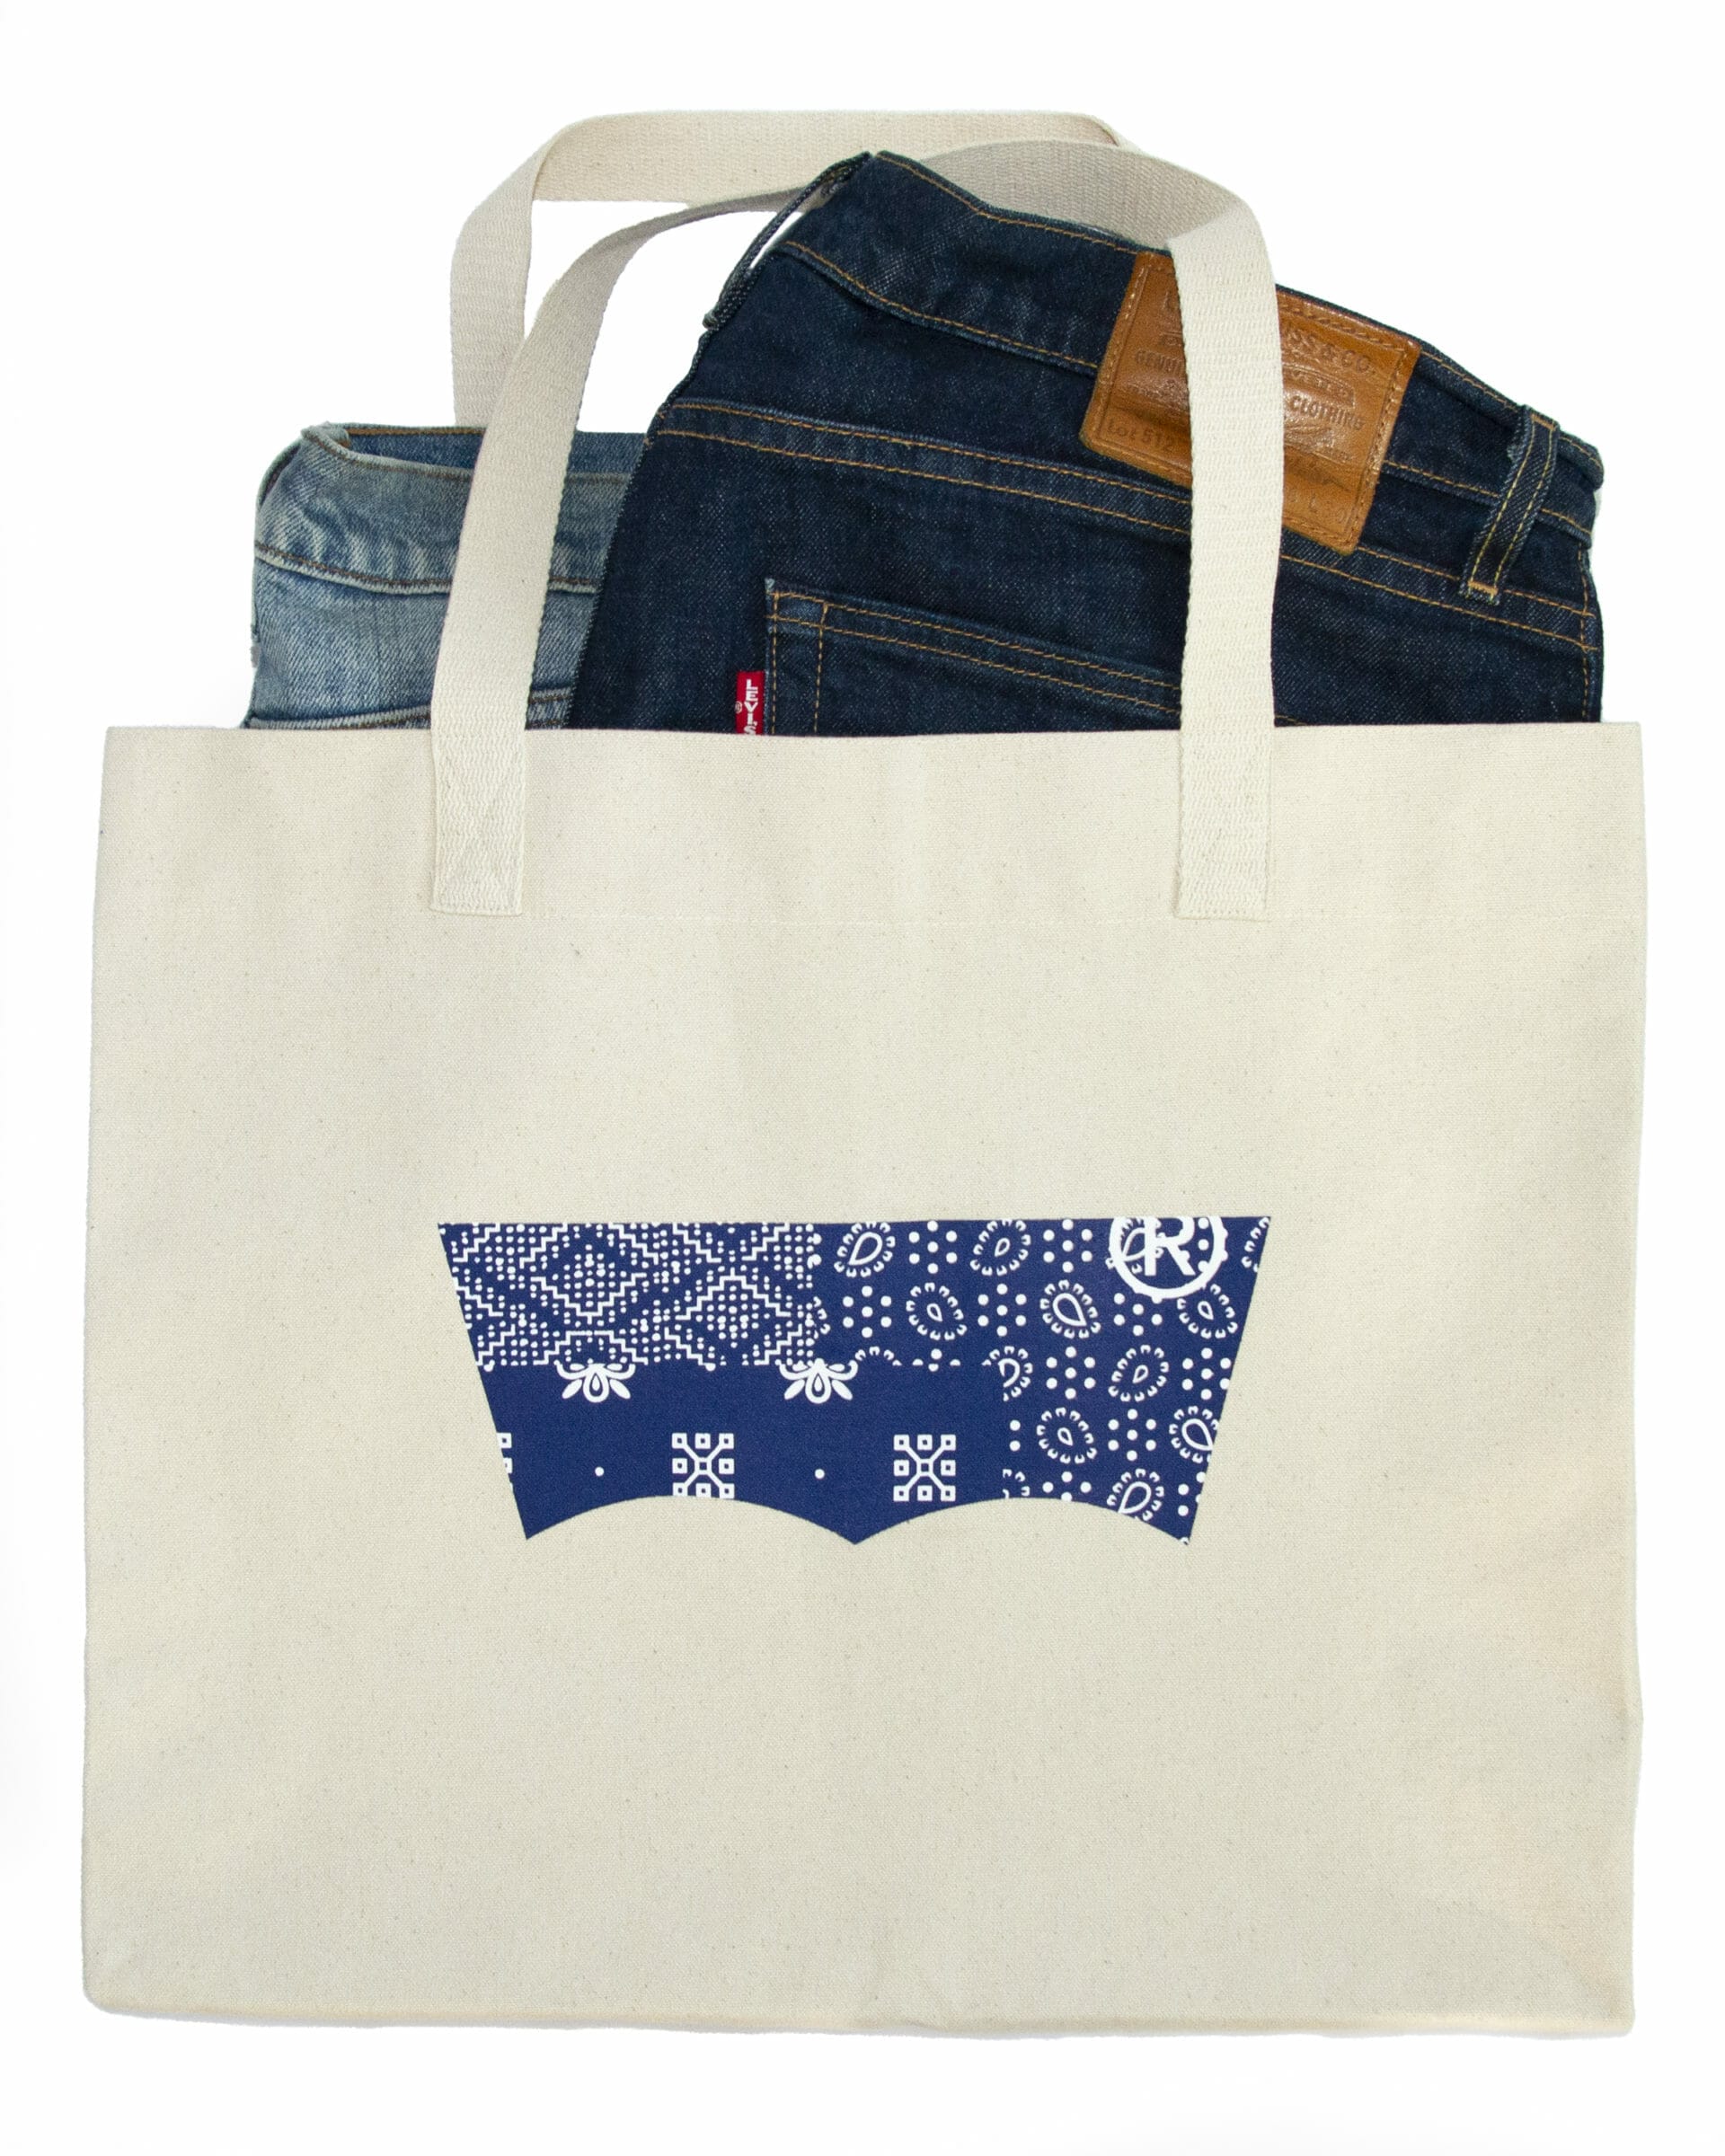 Levis branded reusable shopping bags bulk with two pairs of jeans inside